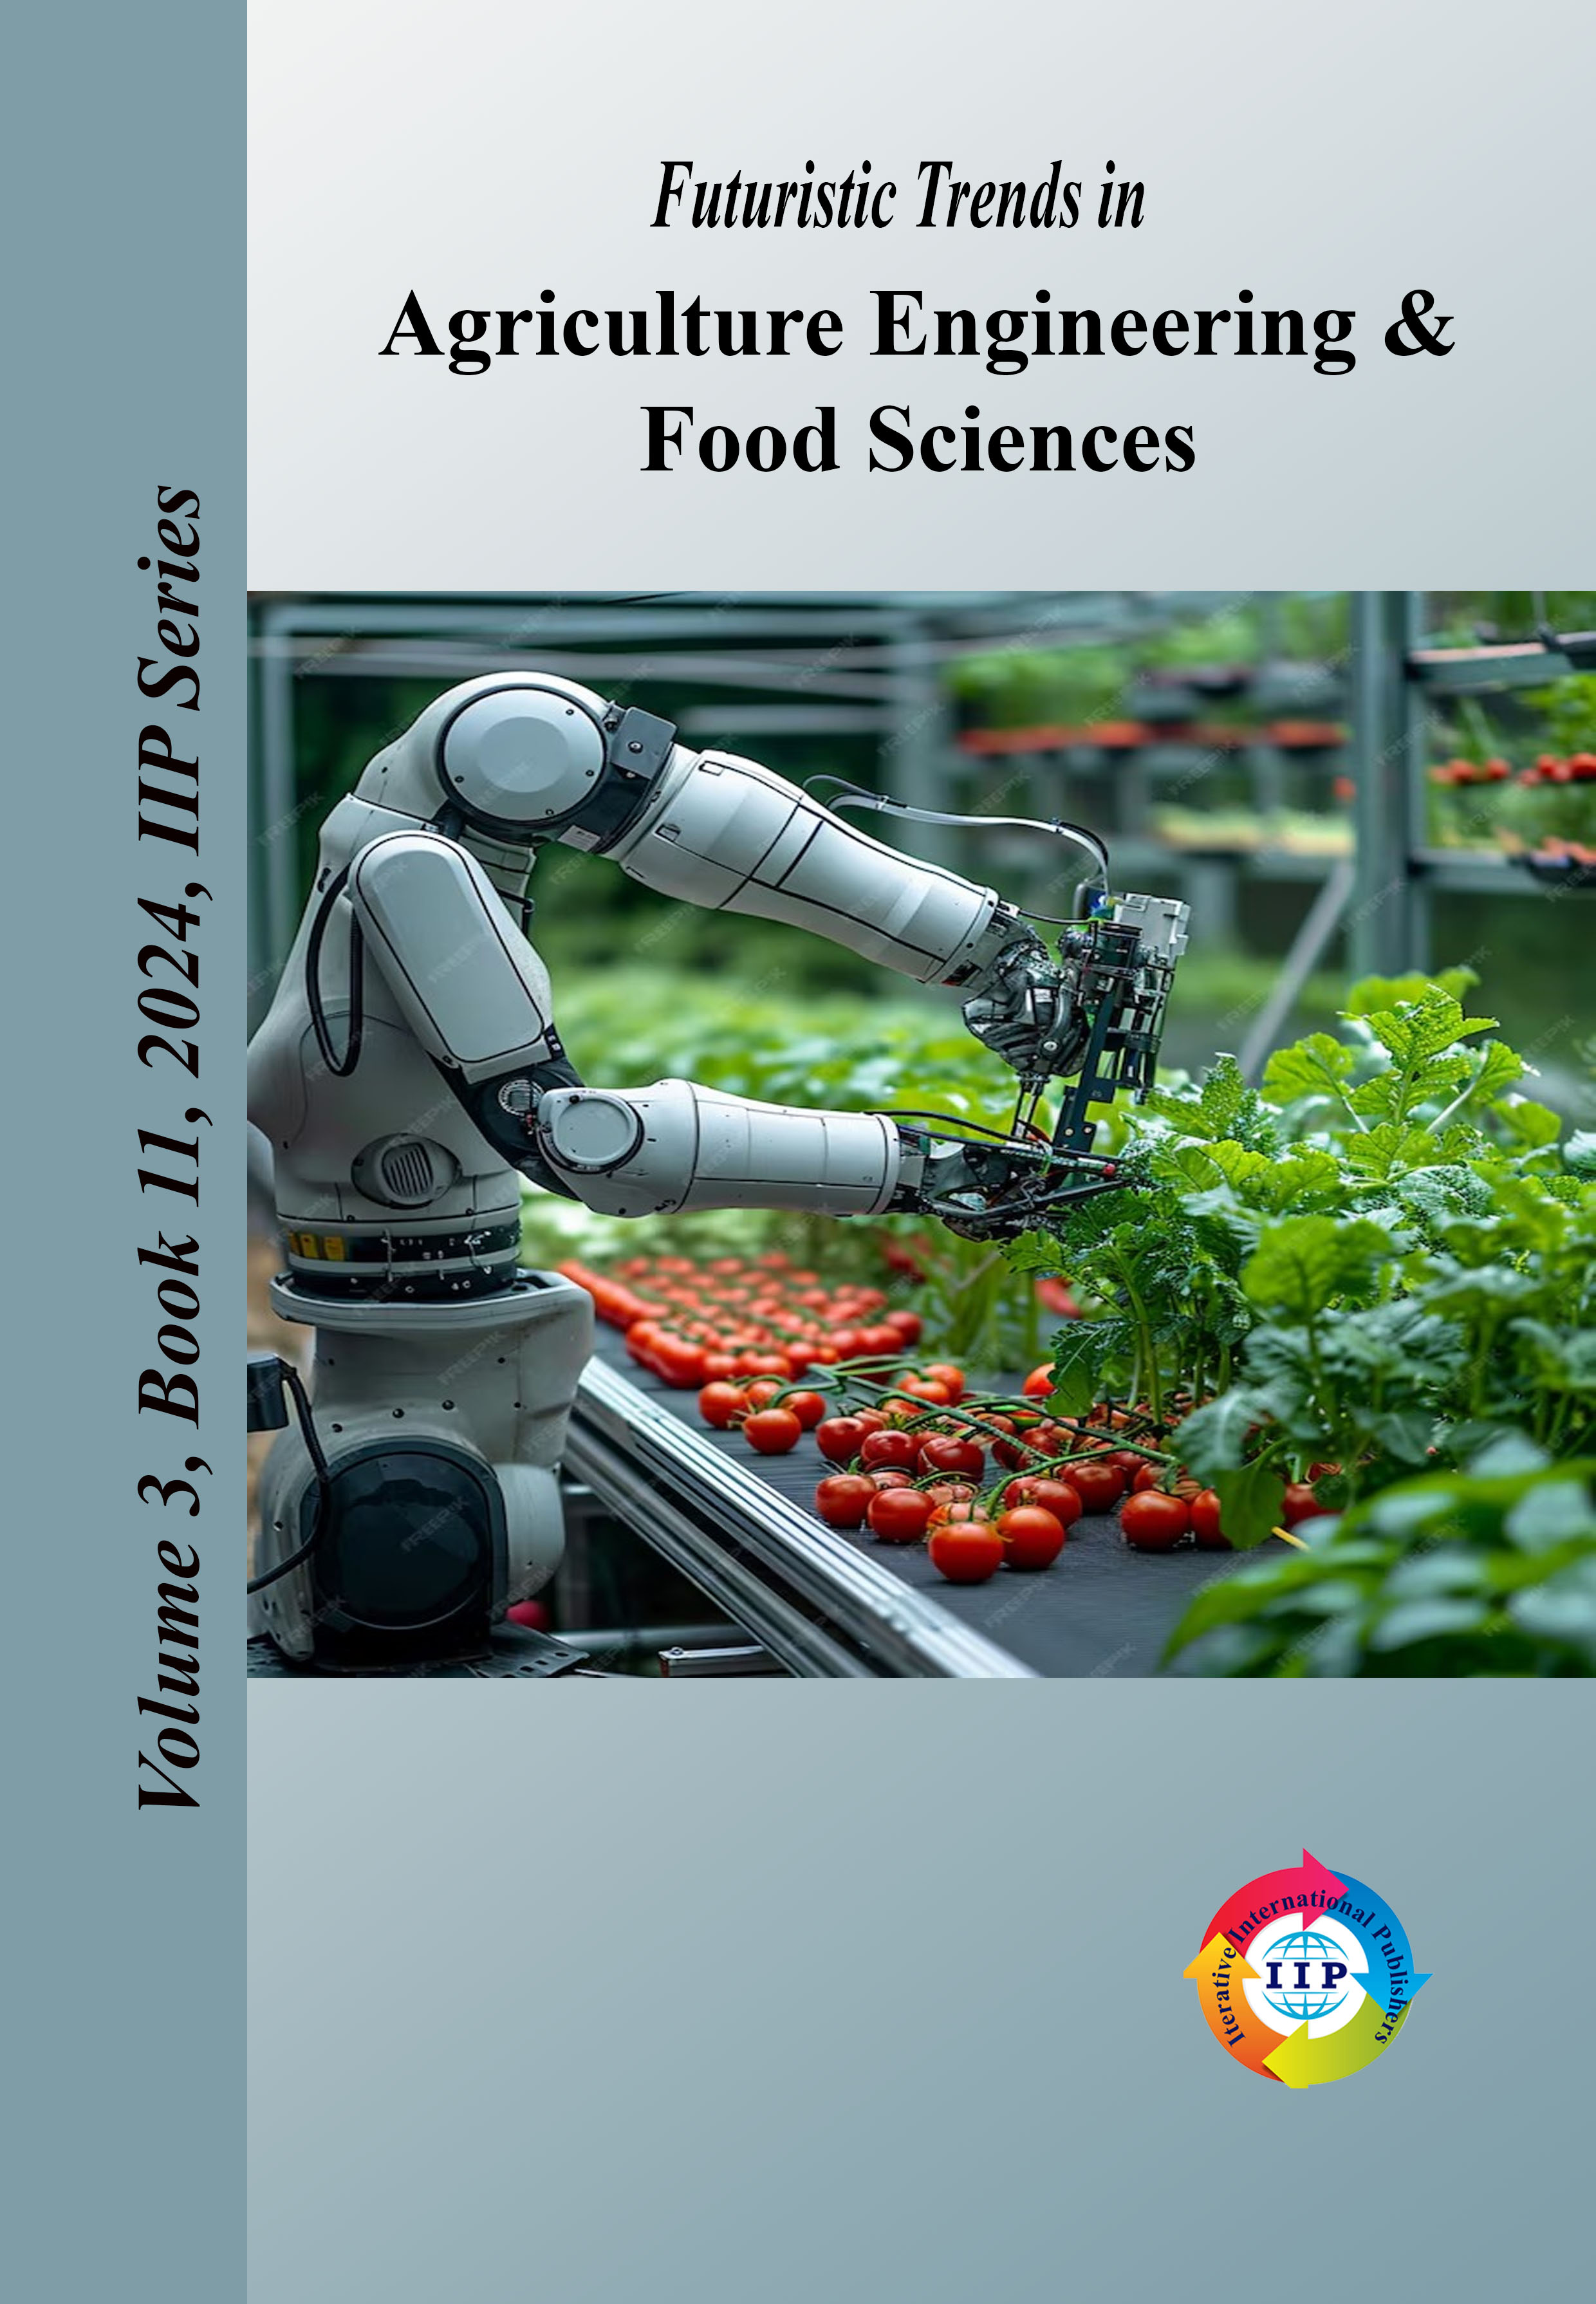 Futuristic Trends in Agriculture Engineering & Food Sciences Volume 3 Book 11